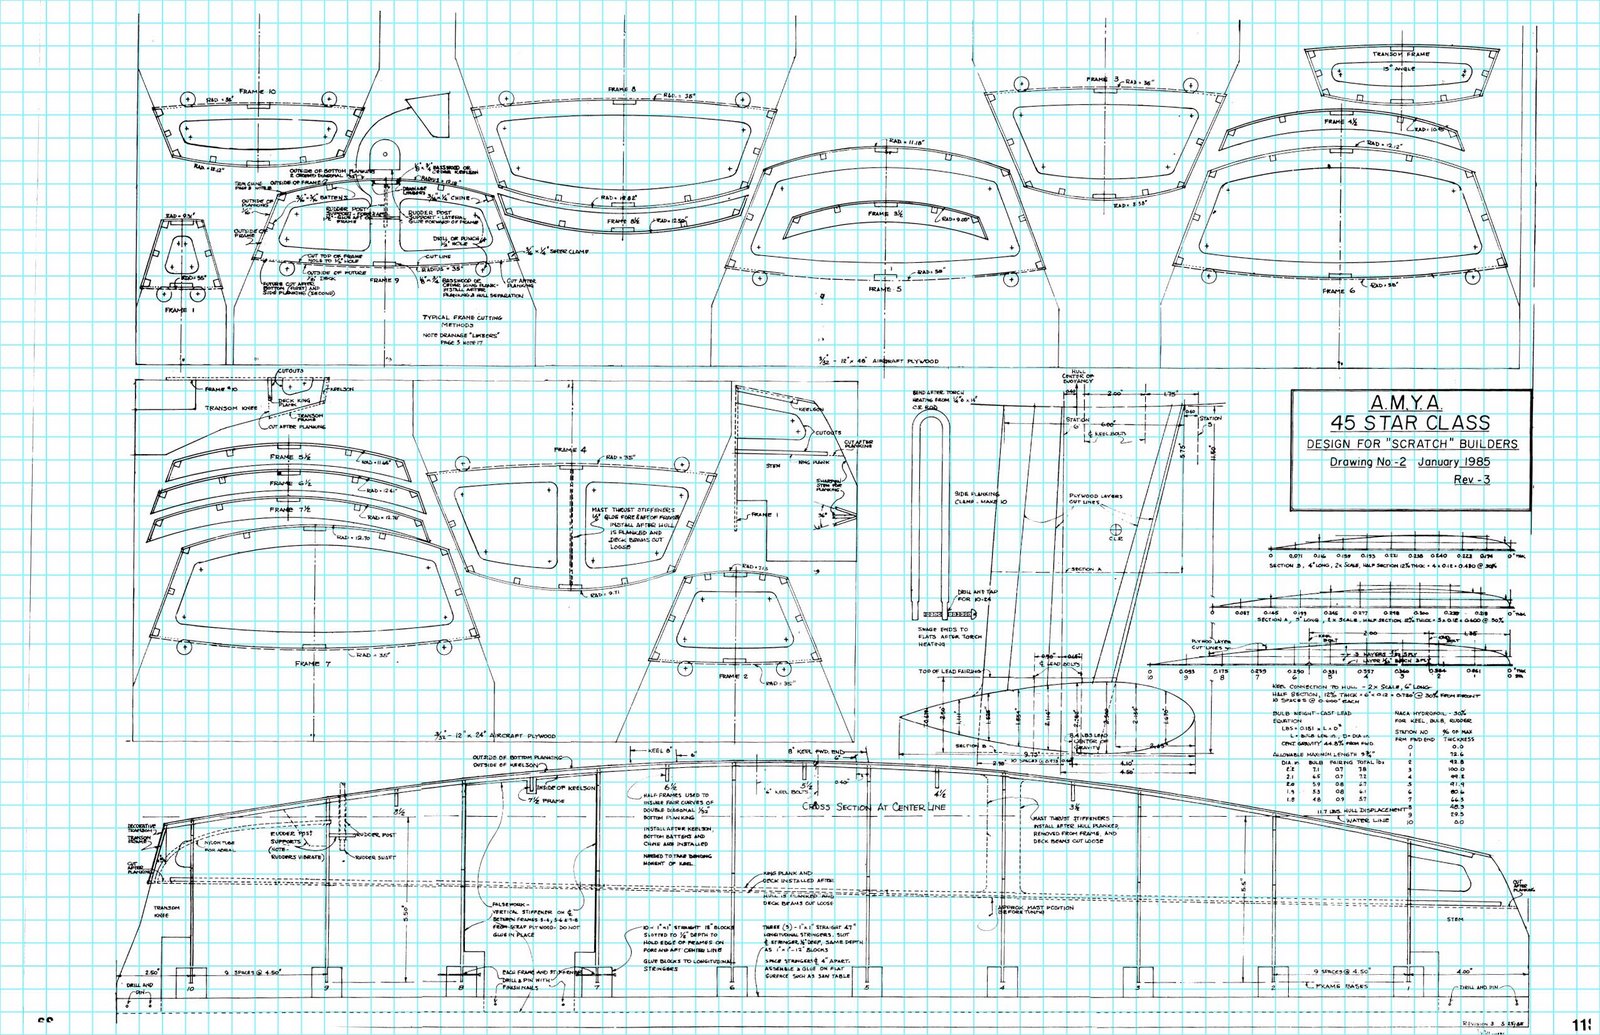 Download Boat Plans Everything about using boat building plans to 